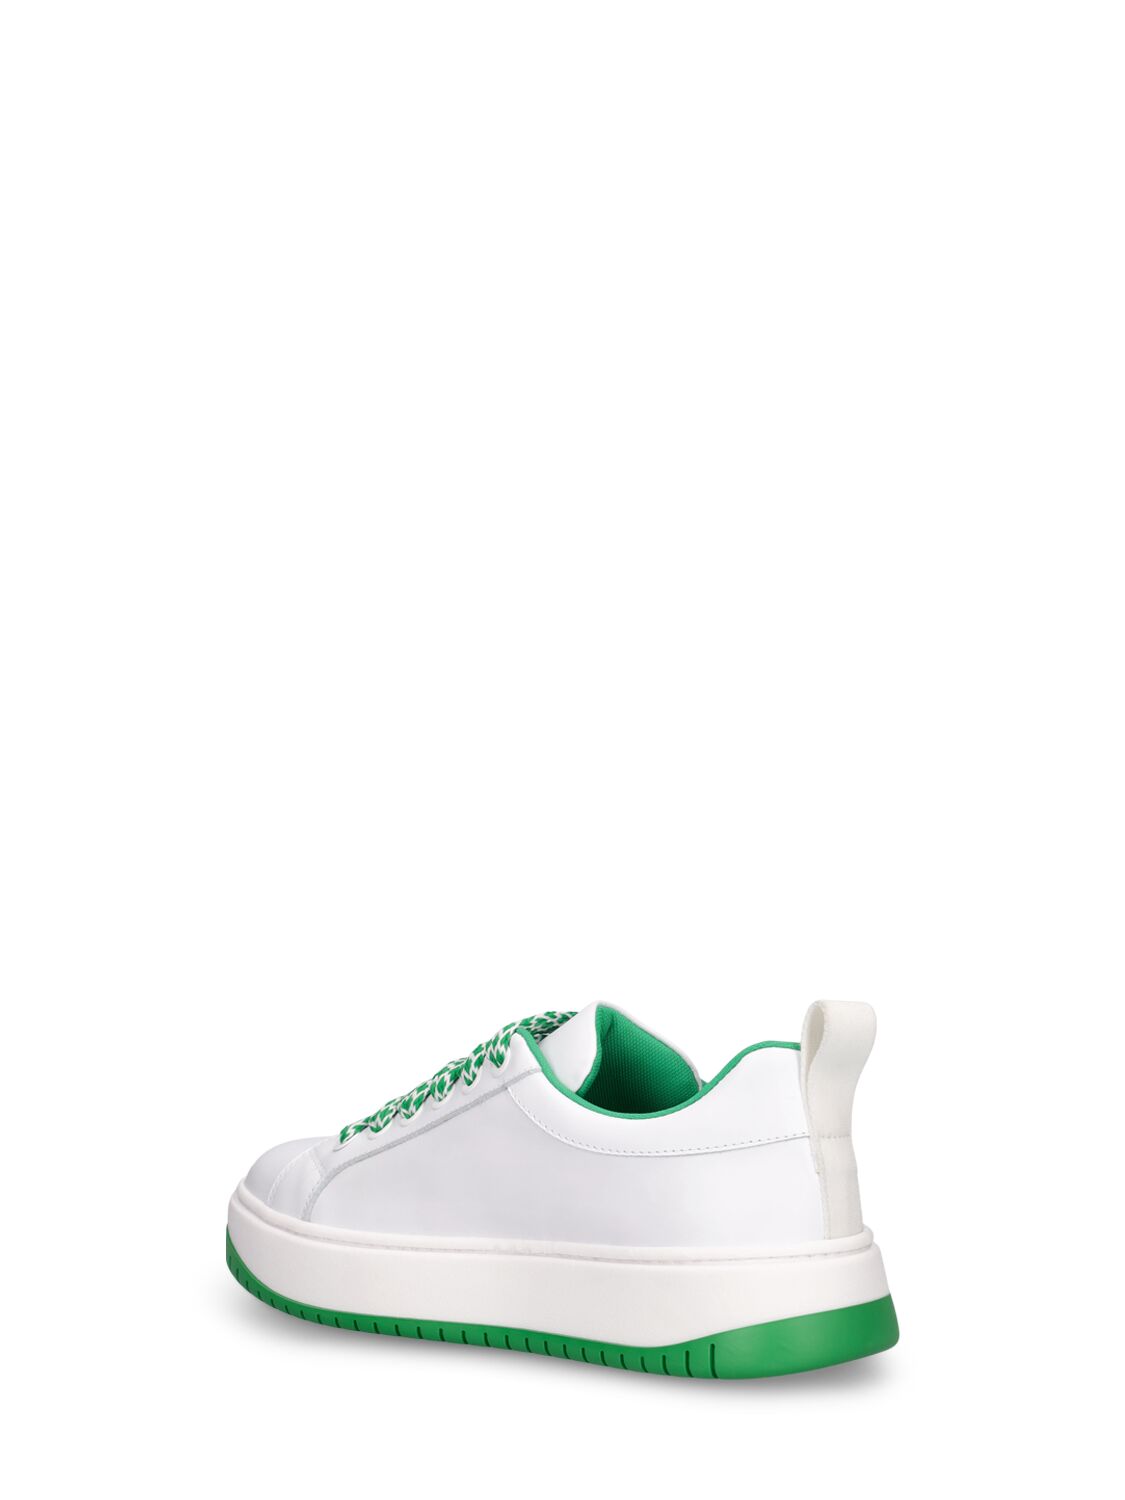 Shop Msgm Logo Print Leather Lace-up Sneakers In White,green